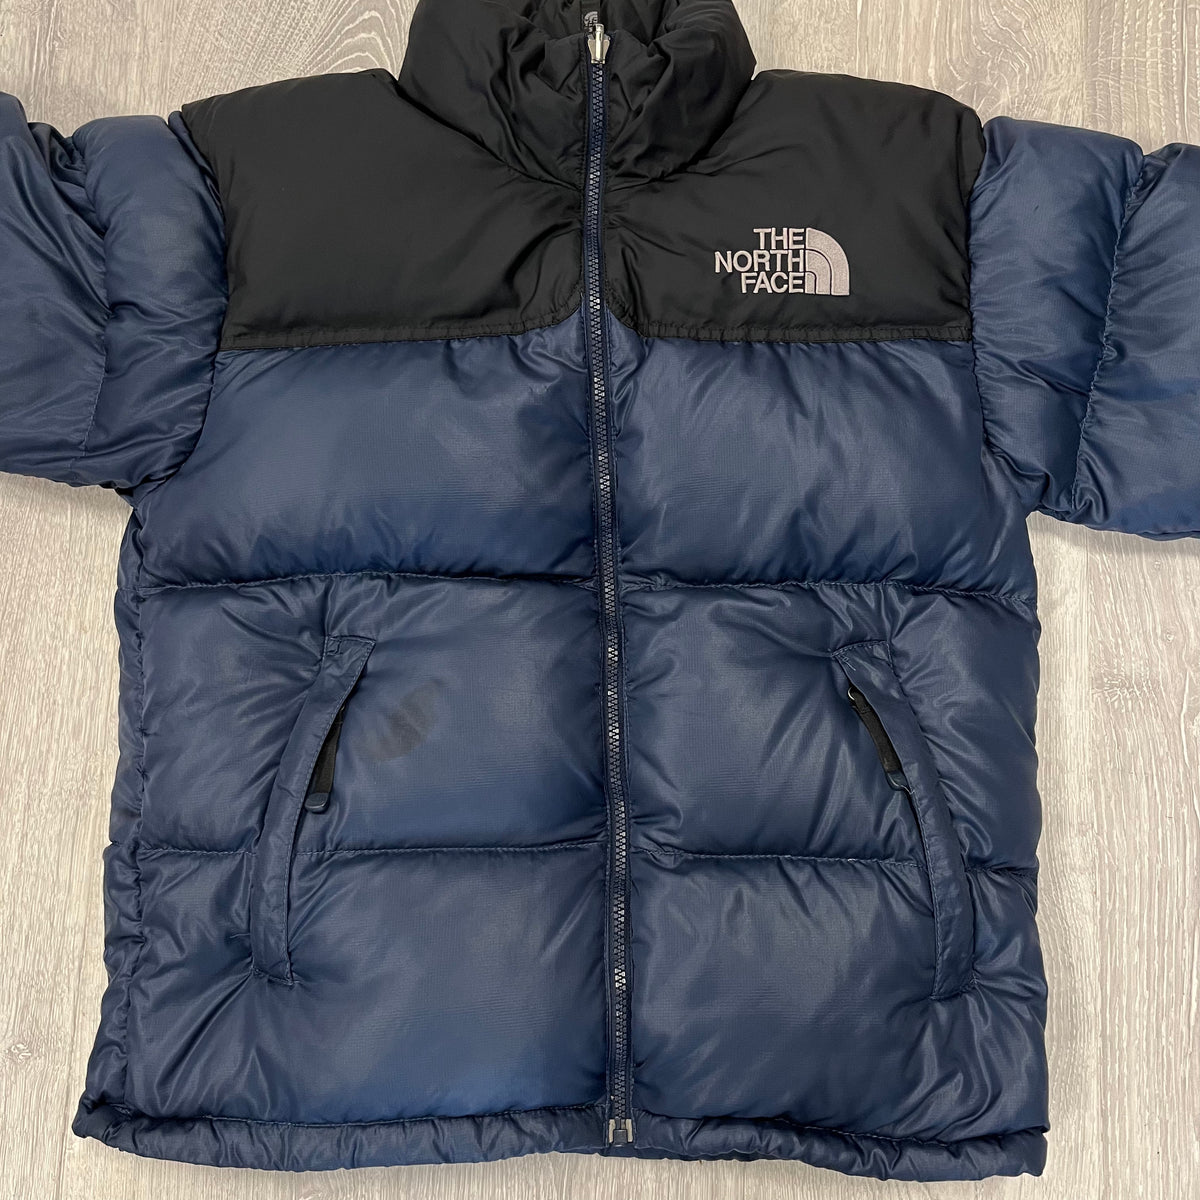 The North Face Navy Blue Puffer Jacket WITH STAIN | We Vintage